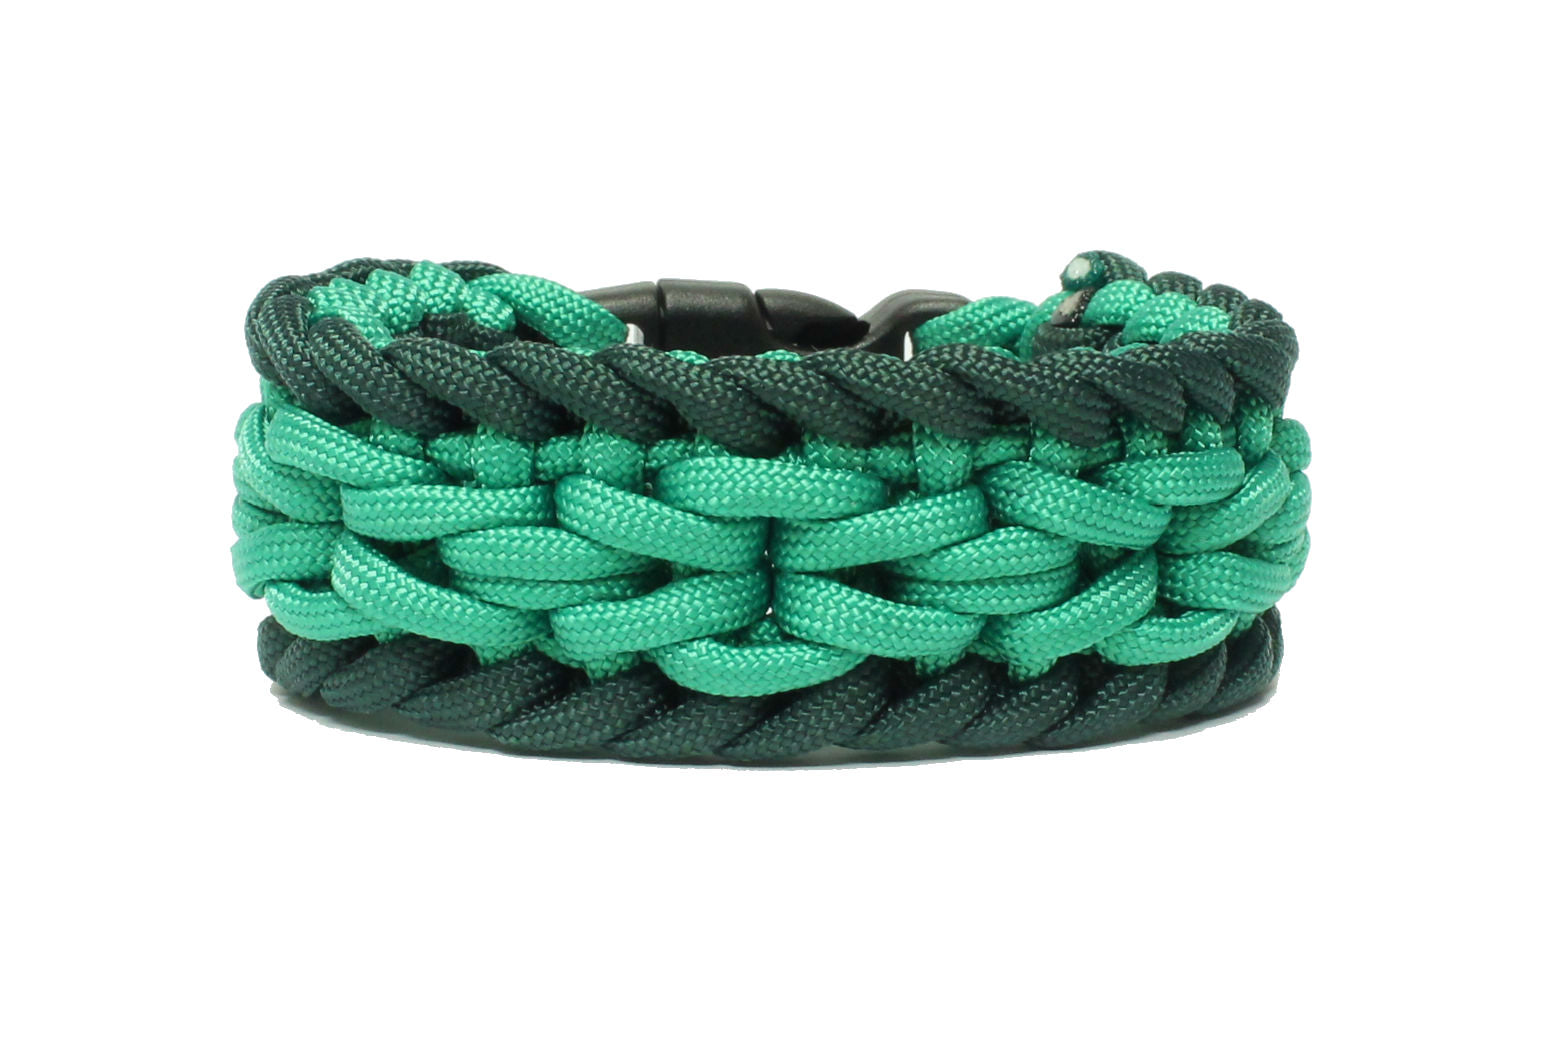 How to Make Parachute Cord (Paracord) Bracelets - Frugal Fun For Boys and  Girls